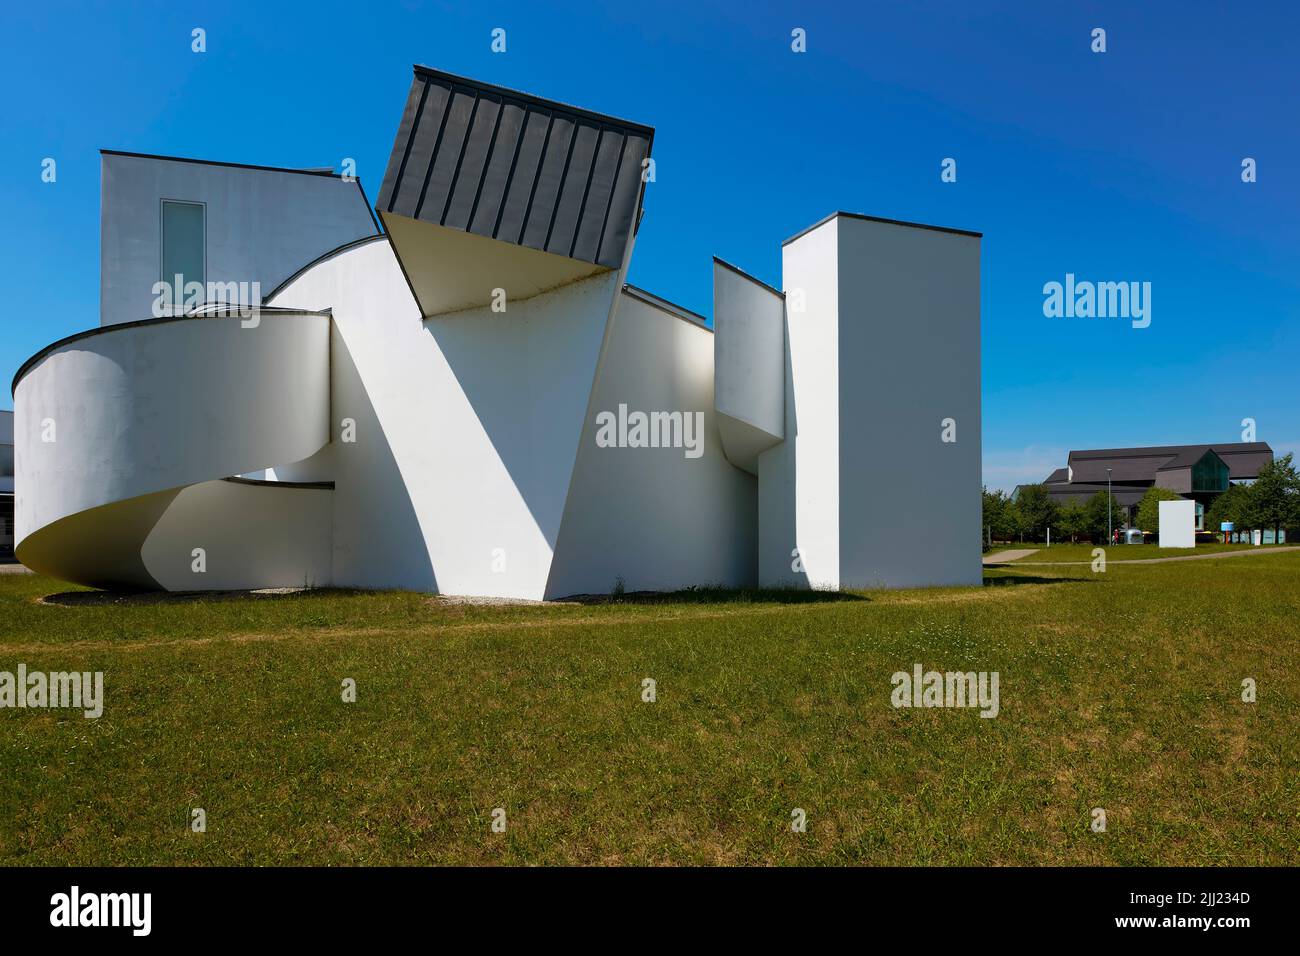 Vitra Design Museum in Vitra Park, architect Frank O. Gehry, Weil am Rhein, Germany. Stock Photo